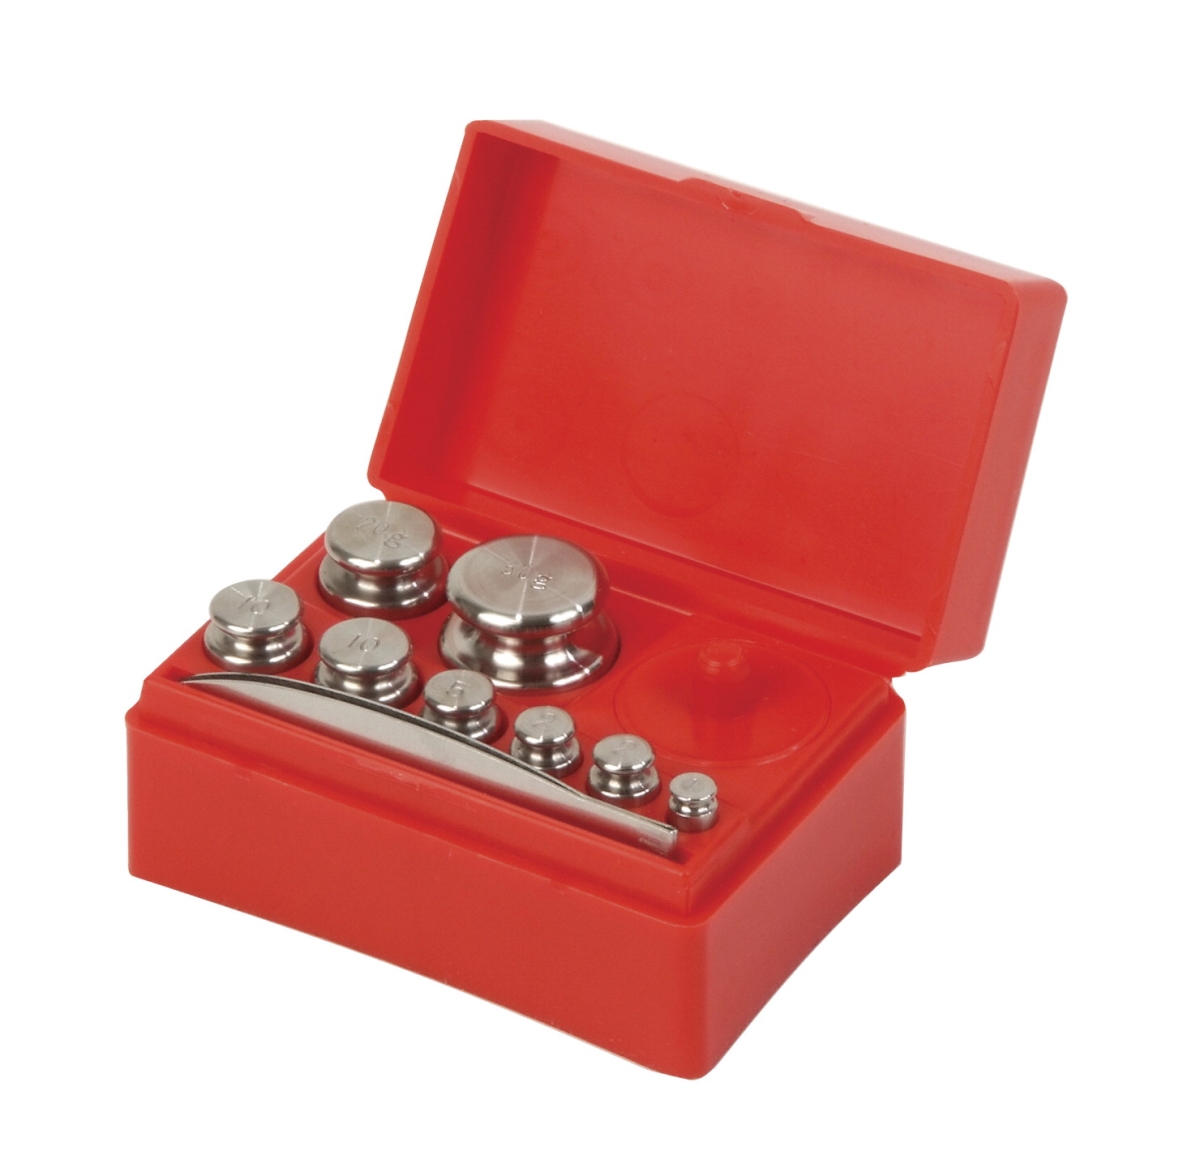 1320625 Stainless Steel Assorted Capacity Primary Weight Set With Storage Container - Set Of 8